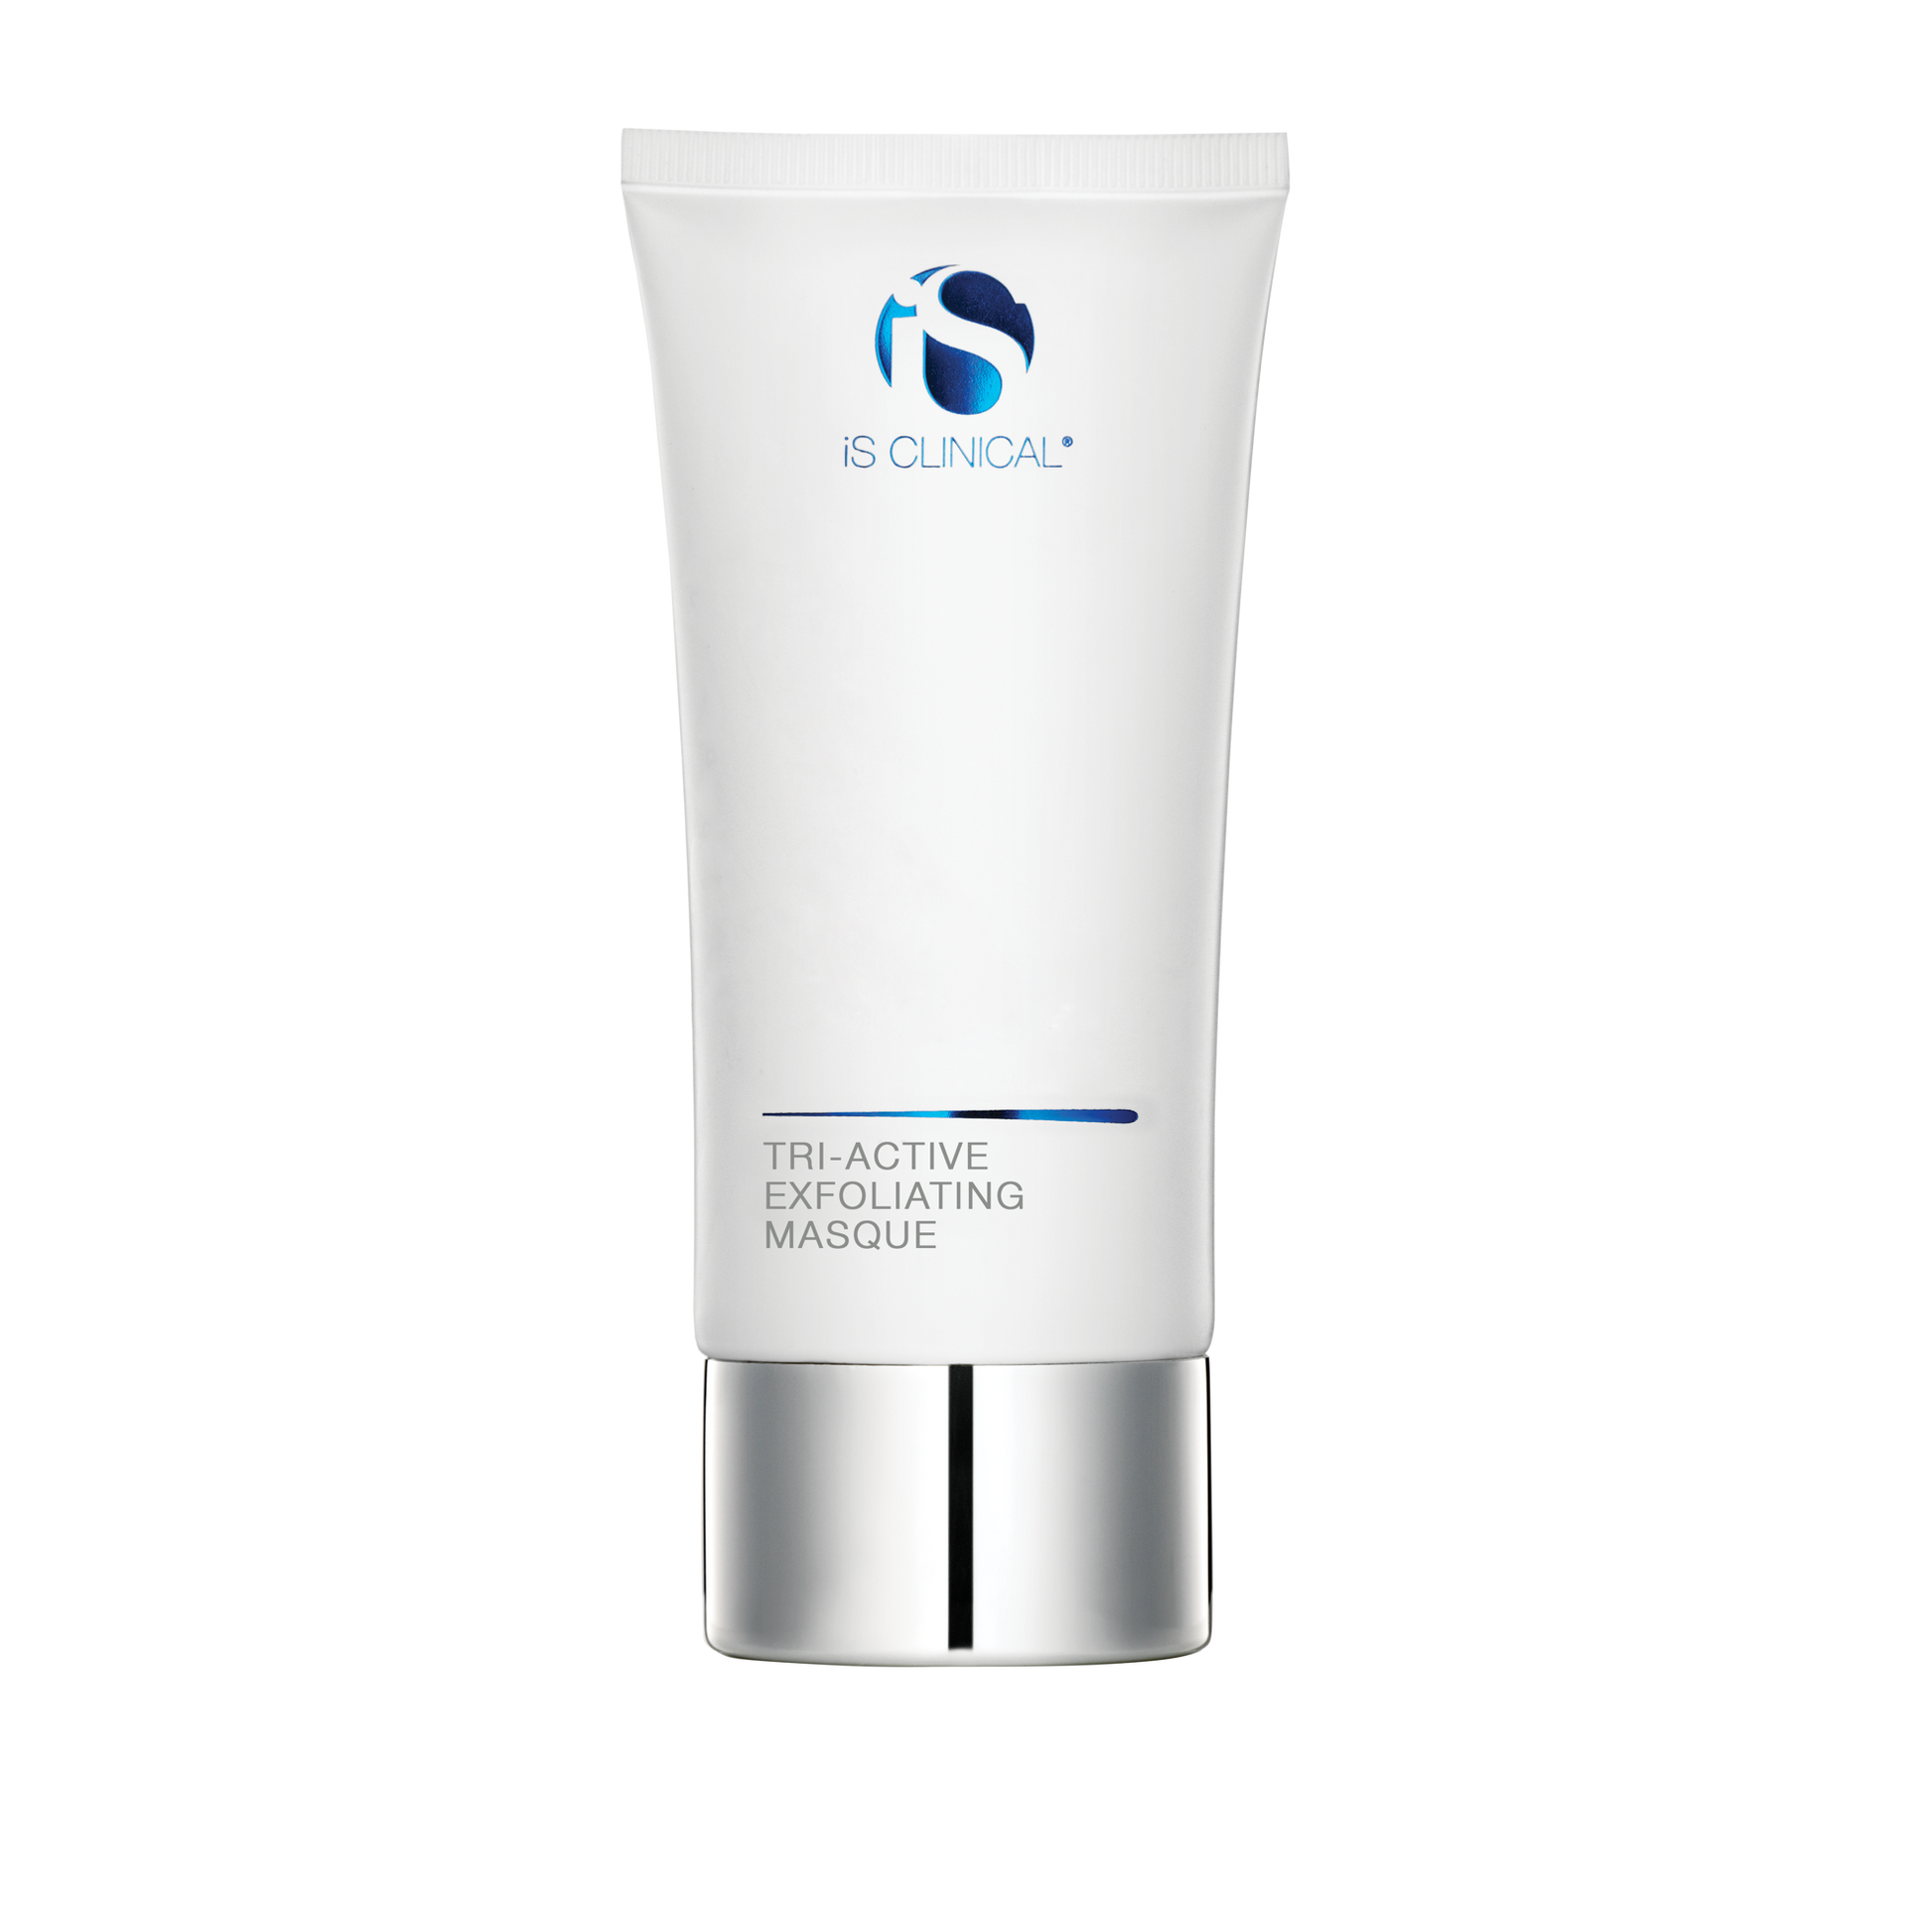 iS CLINICAL Tri-Active Masque